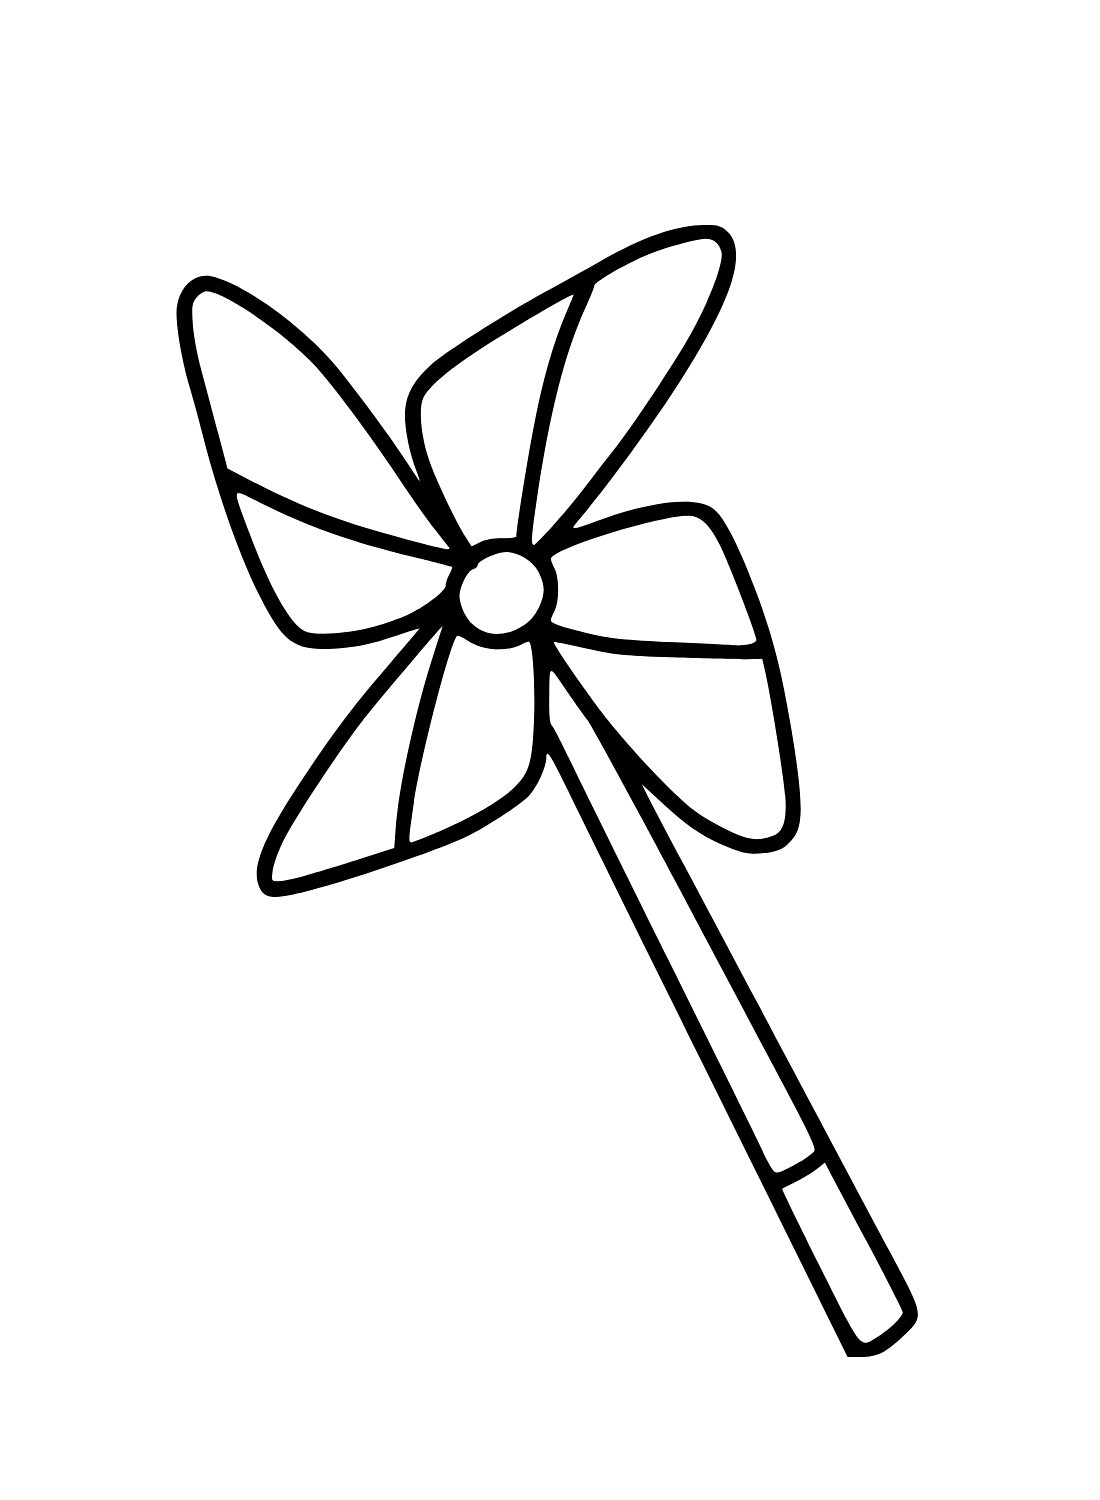 Pinwheel Coloring Pages Printable for Free Download